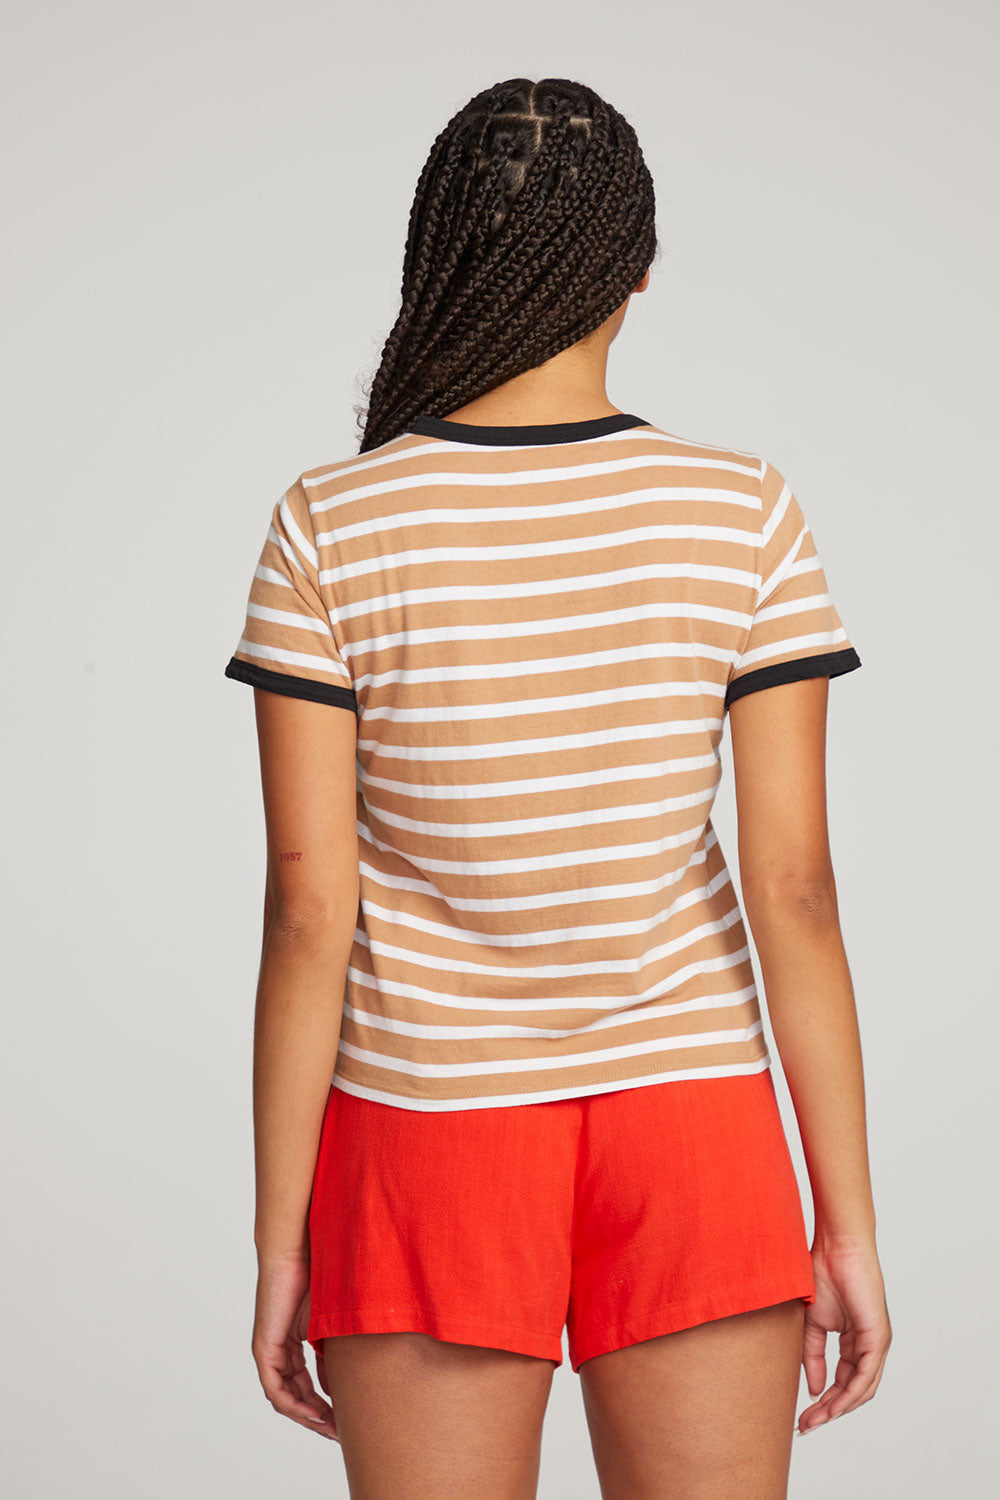 Bonjour Tee WOMENS chaserbrand